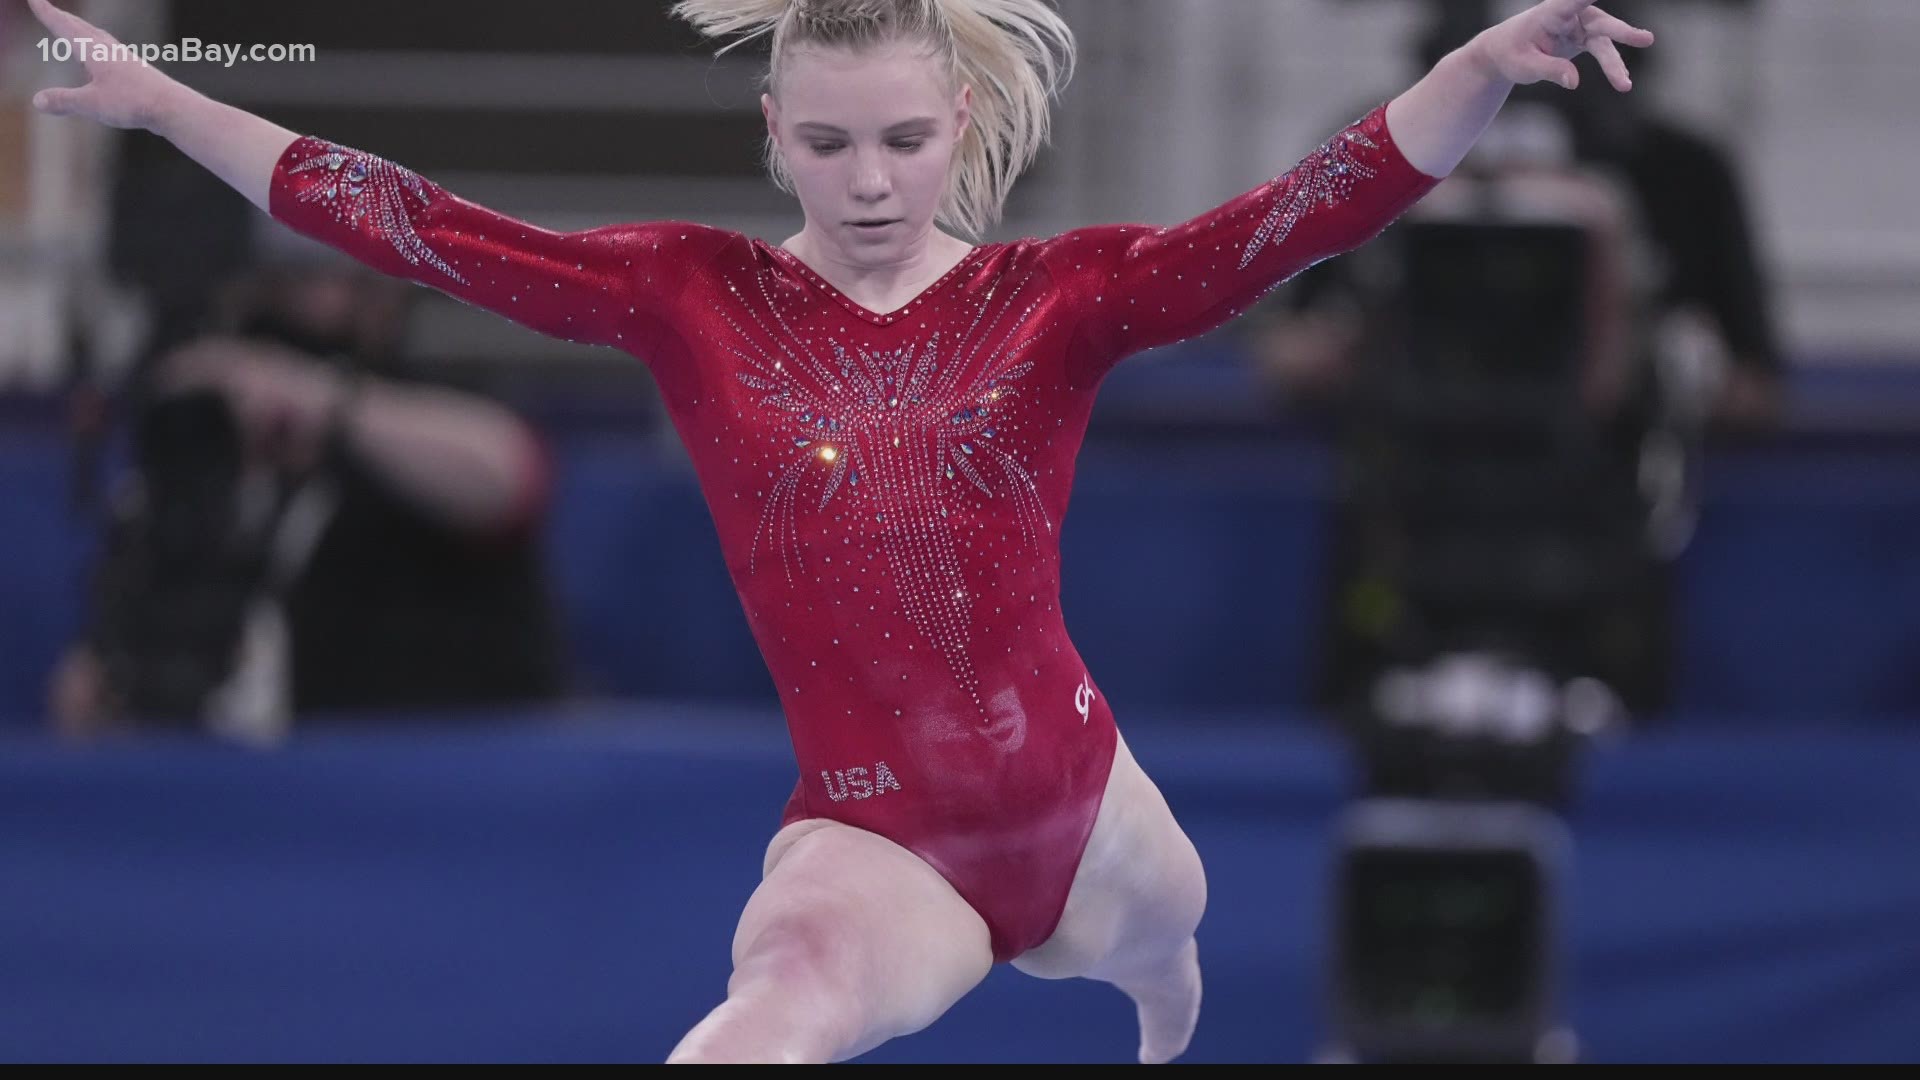 The gymnast has been training for the Olympics with her dad since she was 10. Now, she'll be representing Team USA in Tokyo.